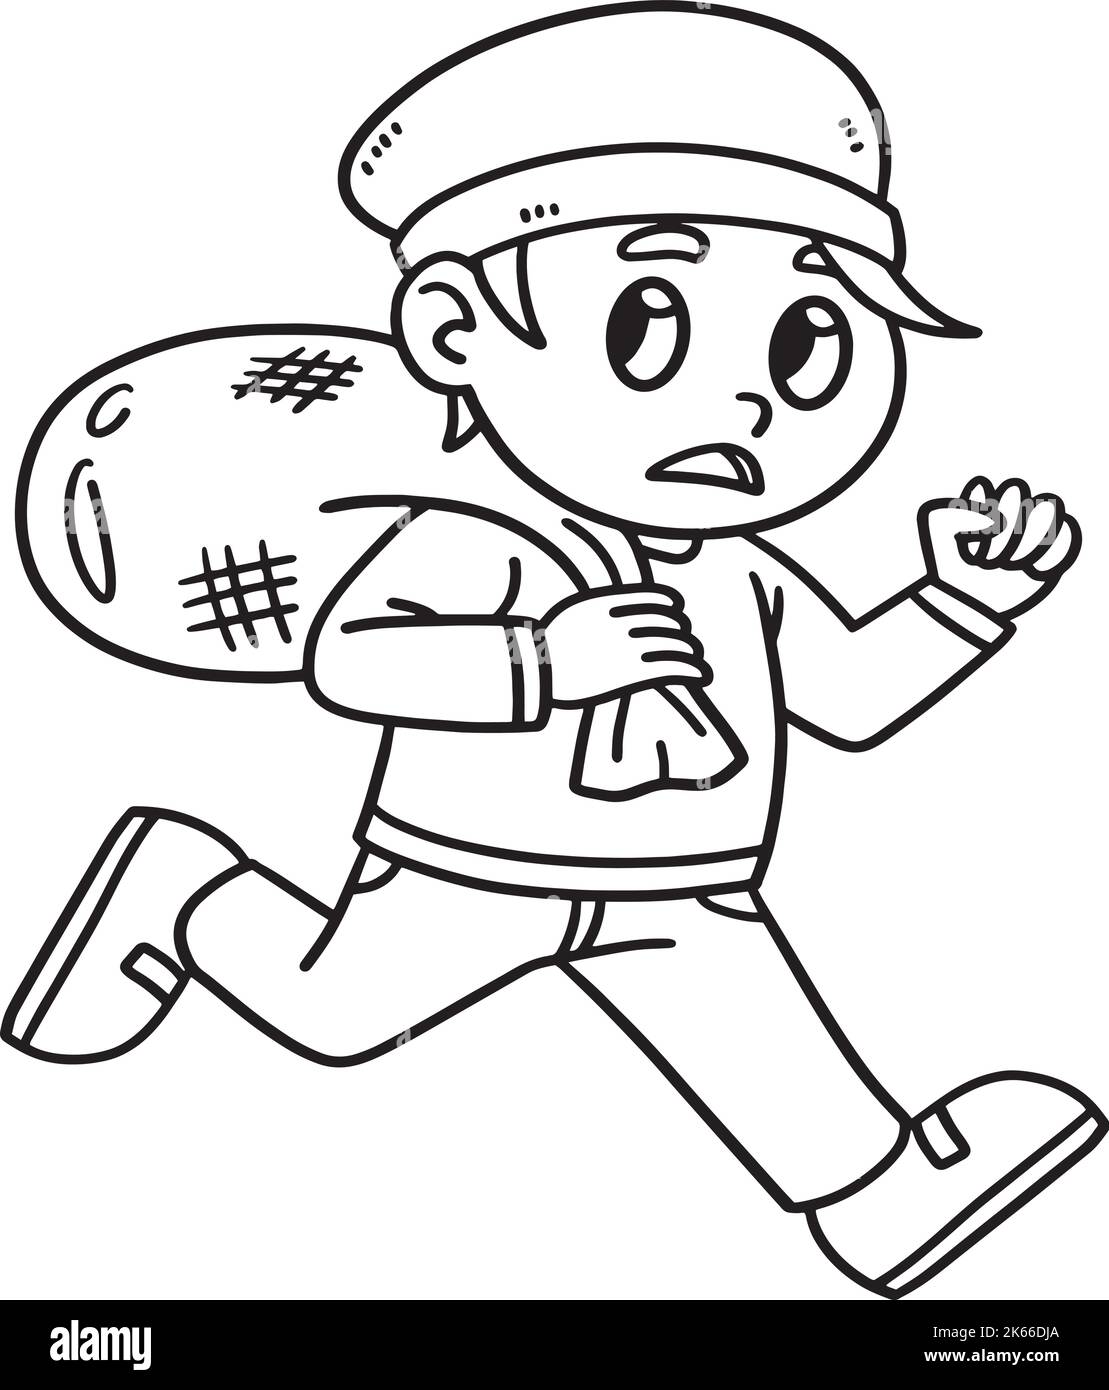 scared running person clip art